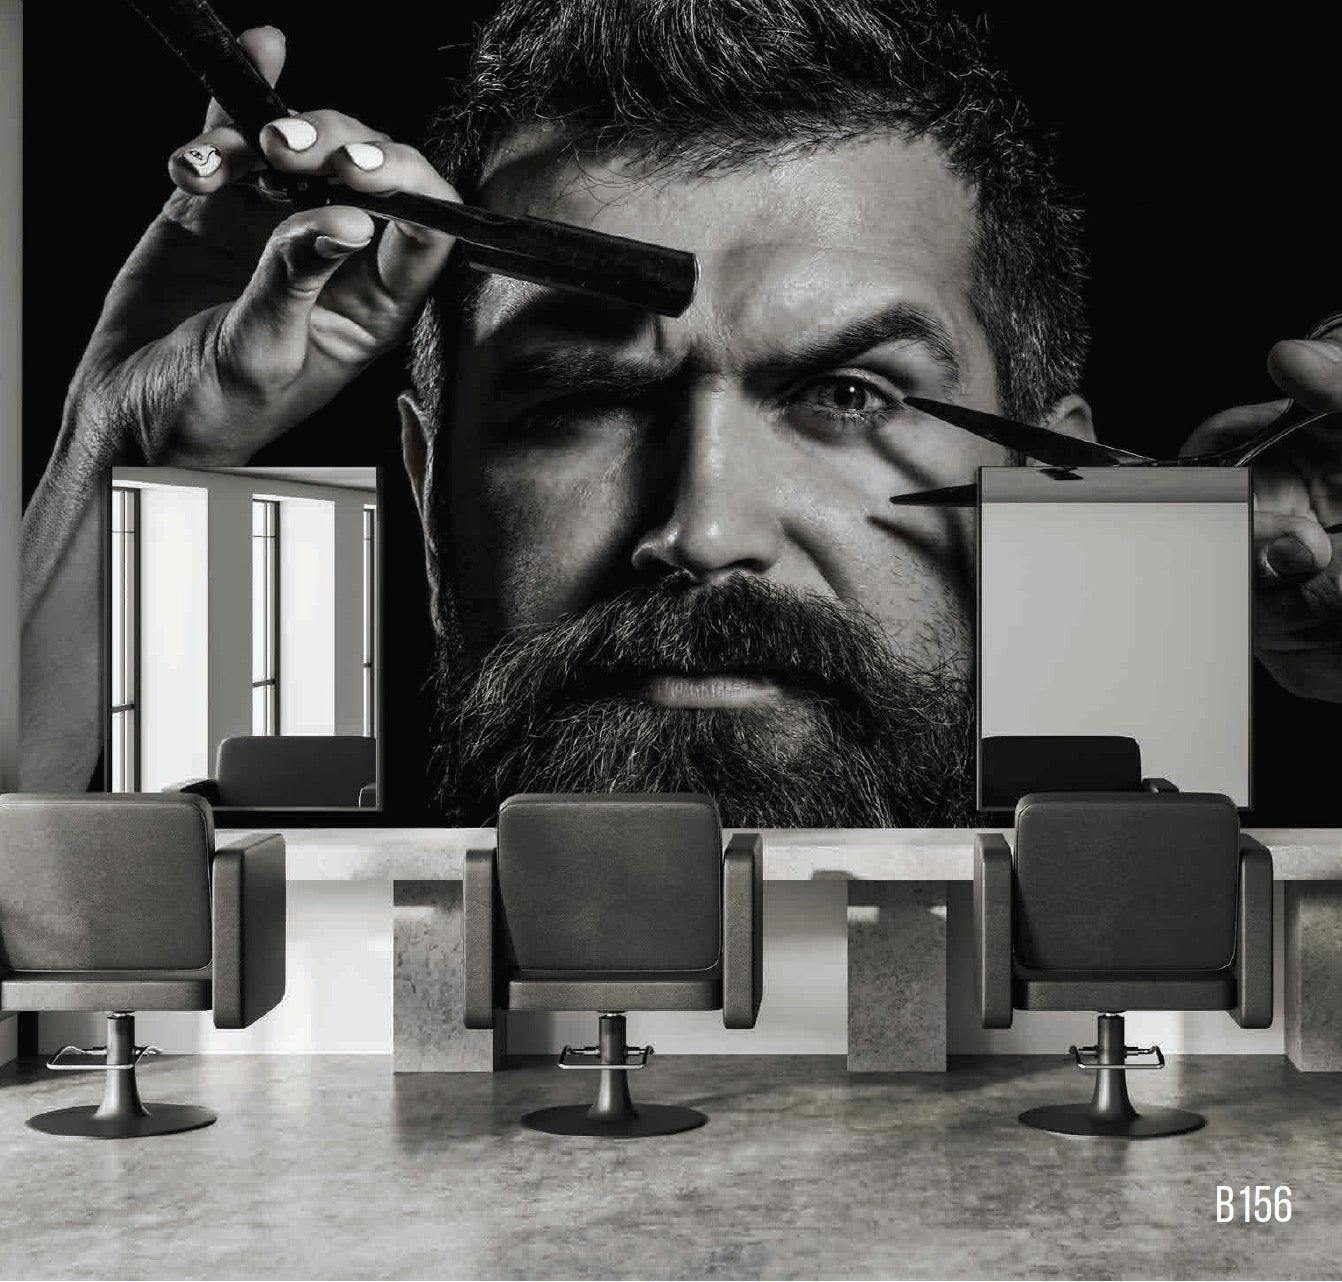 Premium Fiber Canvas Mural: Captivating Image of a Well-Groomed Man Shaping Eyebrows with Comb and Scissors - Elevate Your Space with Flawless Artwork